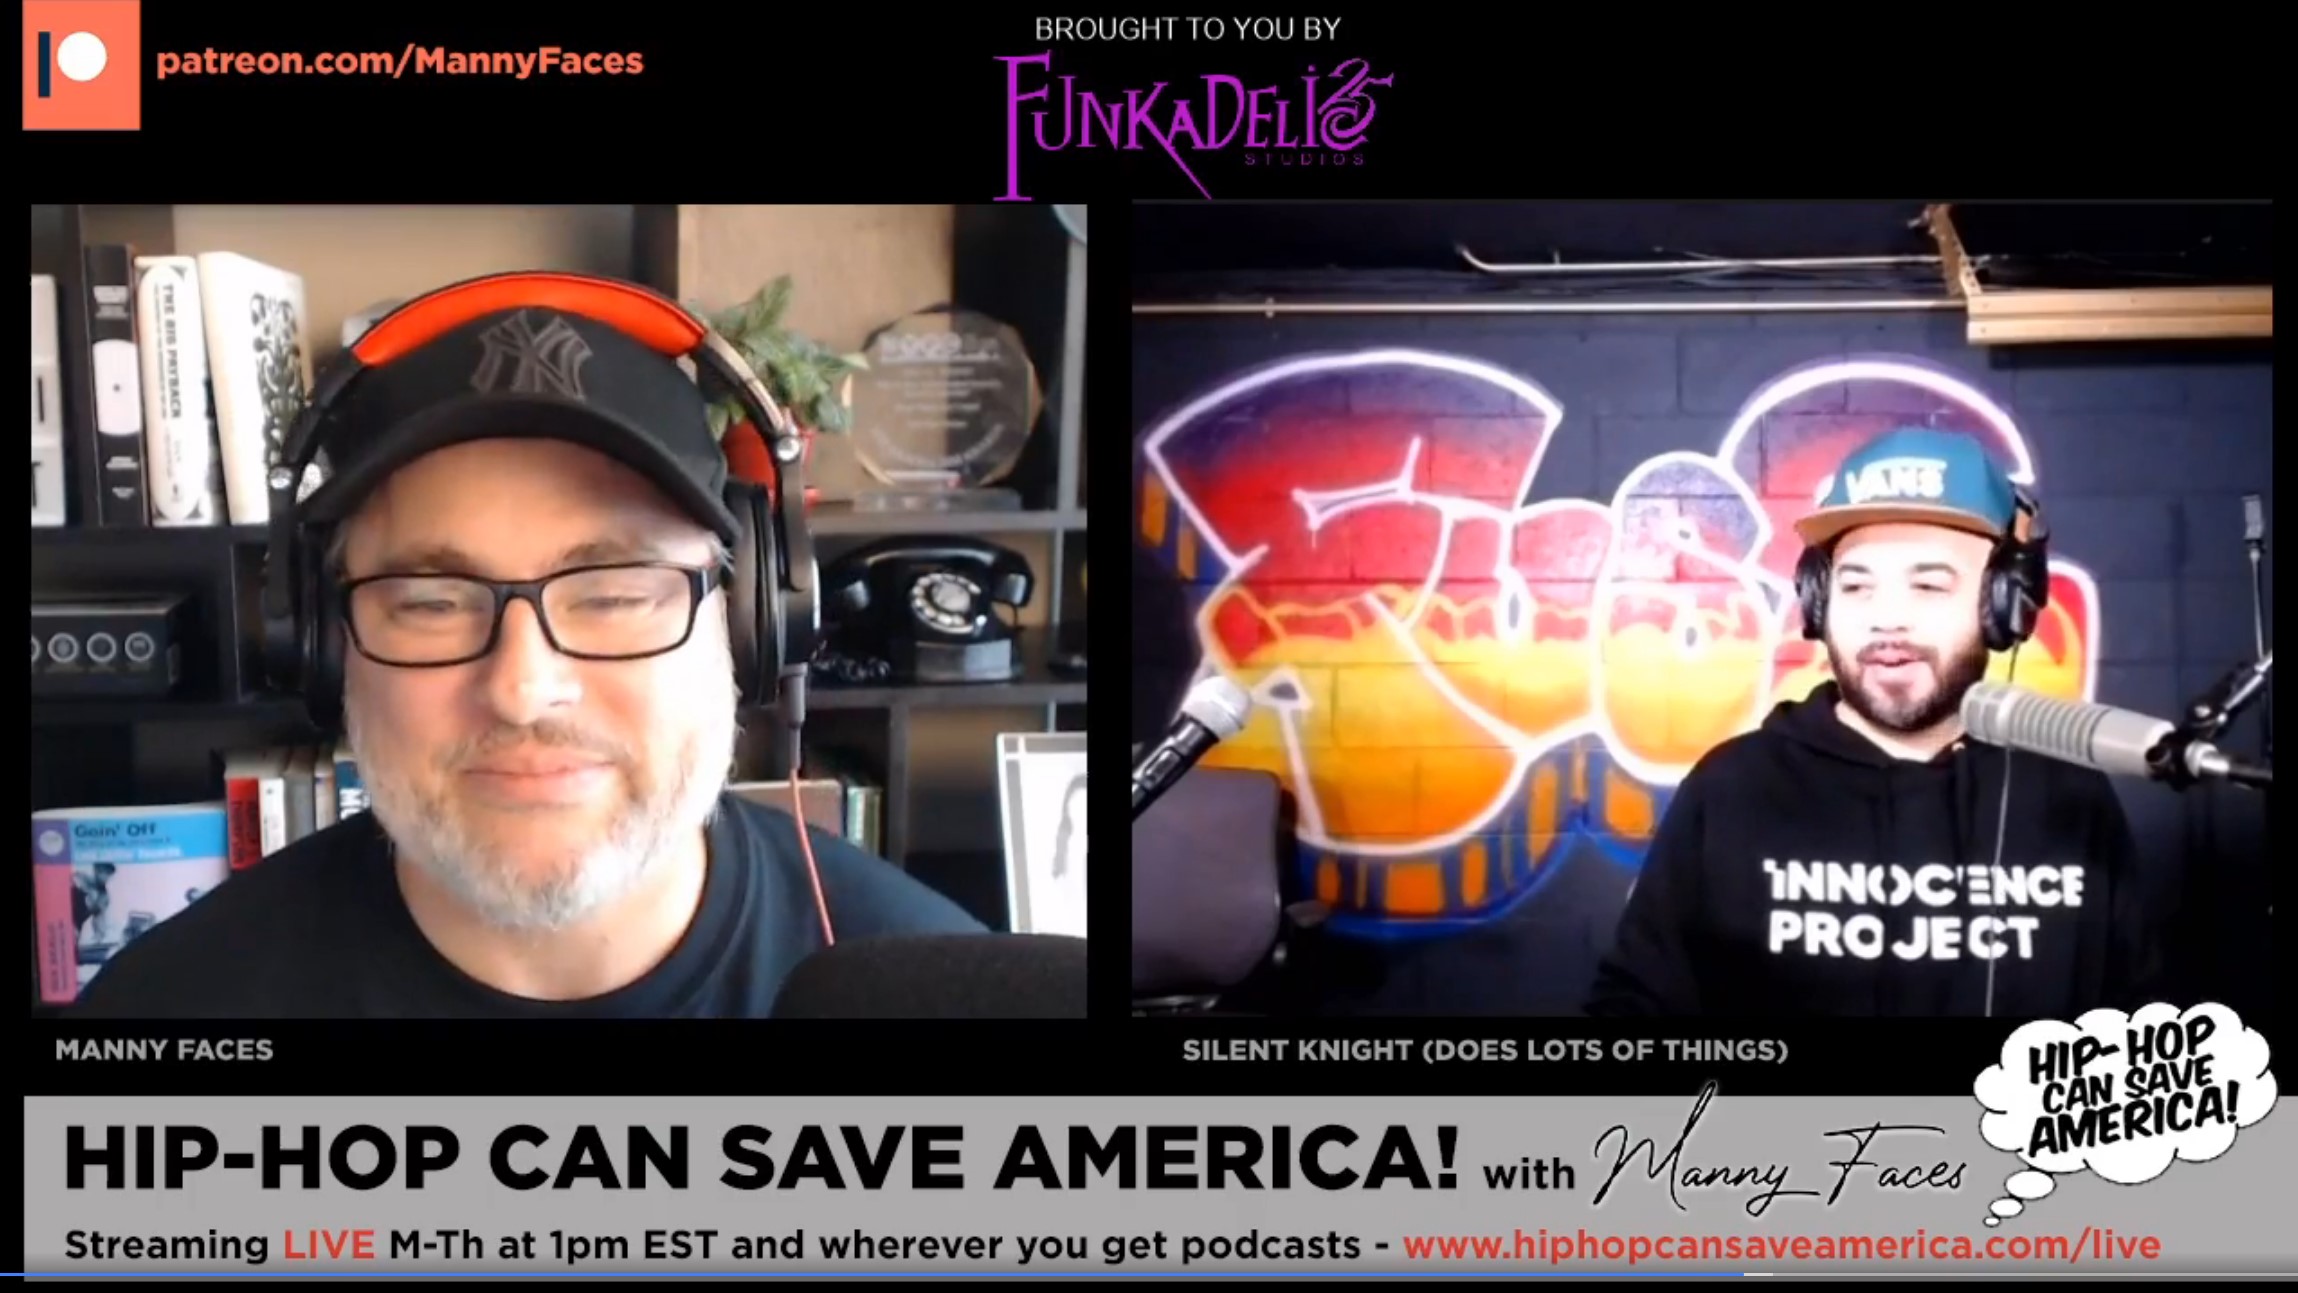 Hip-Hop Can Save America! podcast - Live in September, 2020